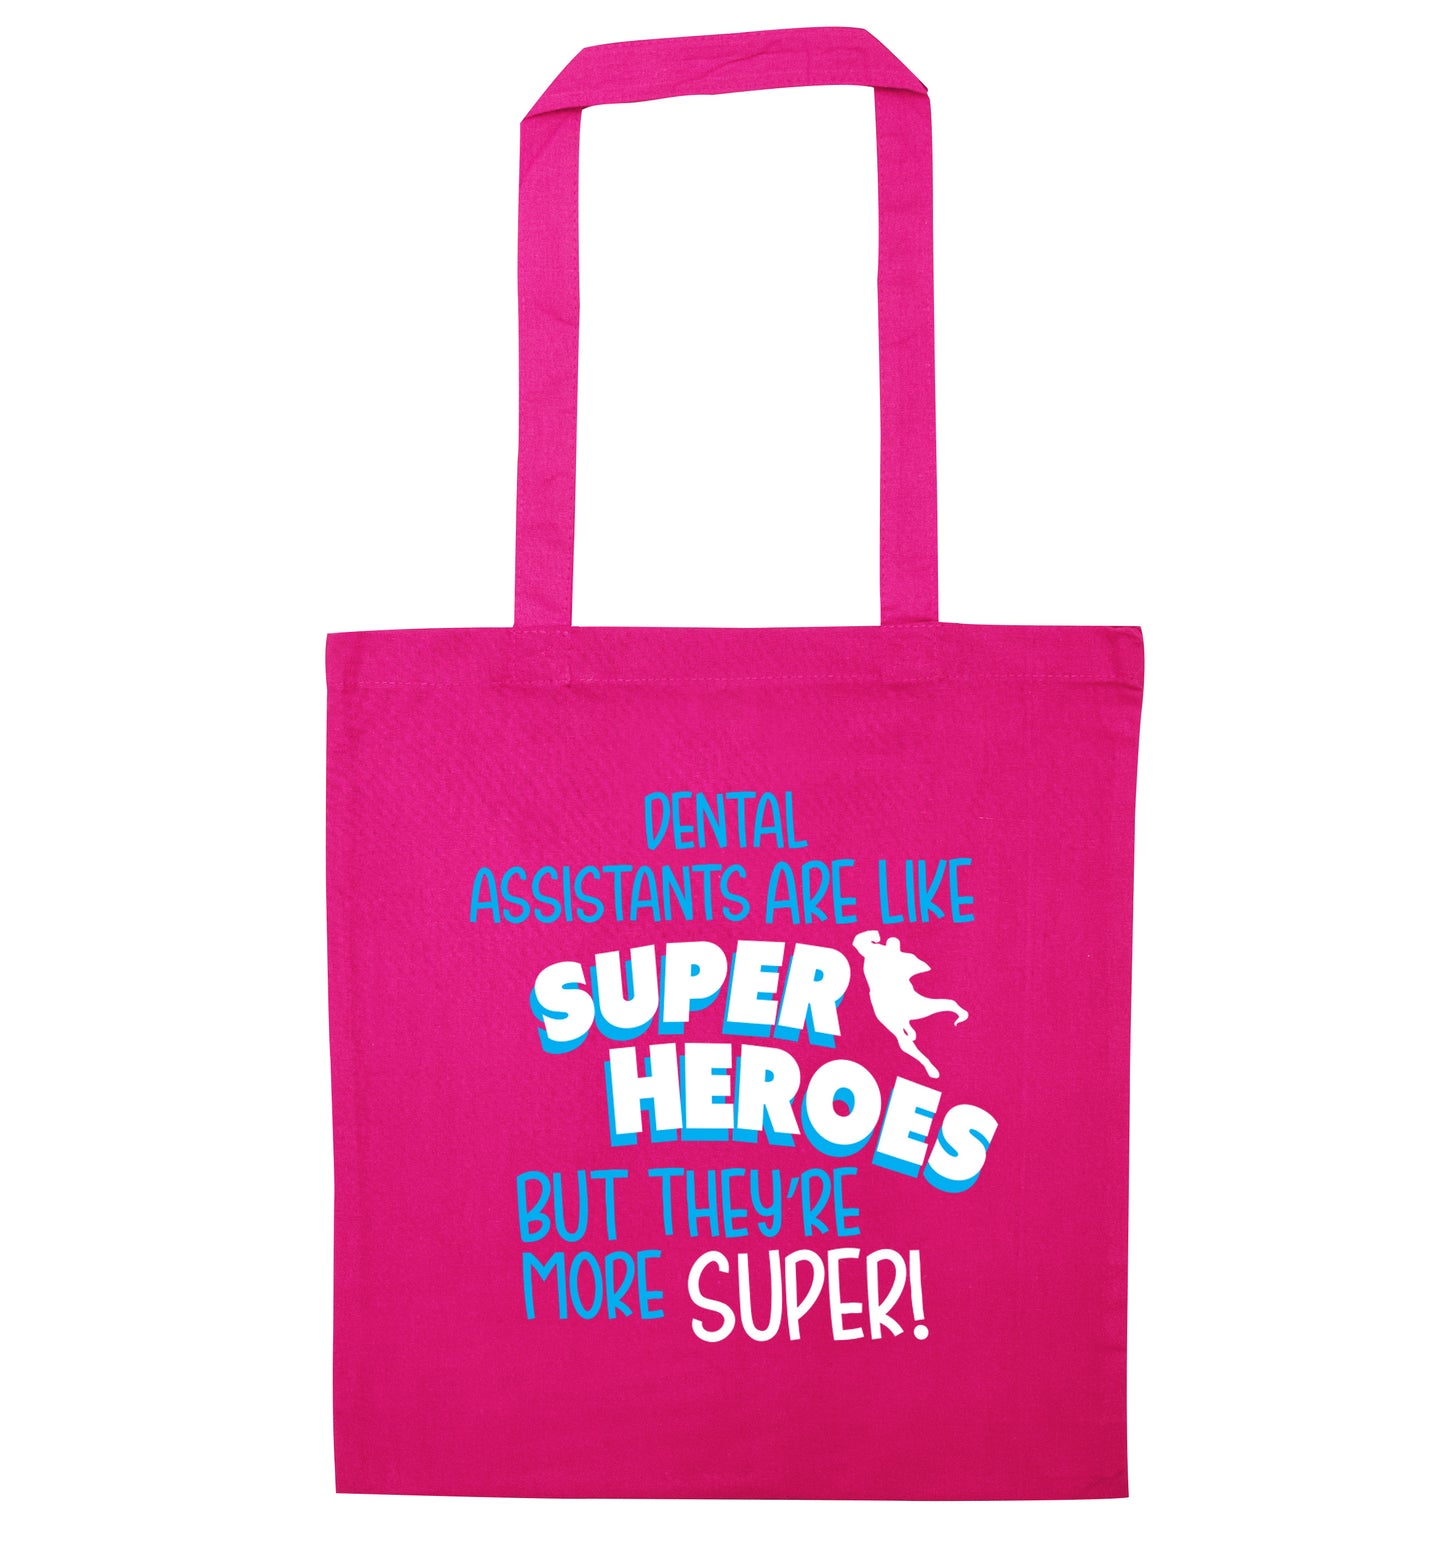 Dental Assistants are like superheros but they're more super pink tote bag